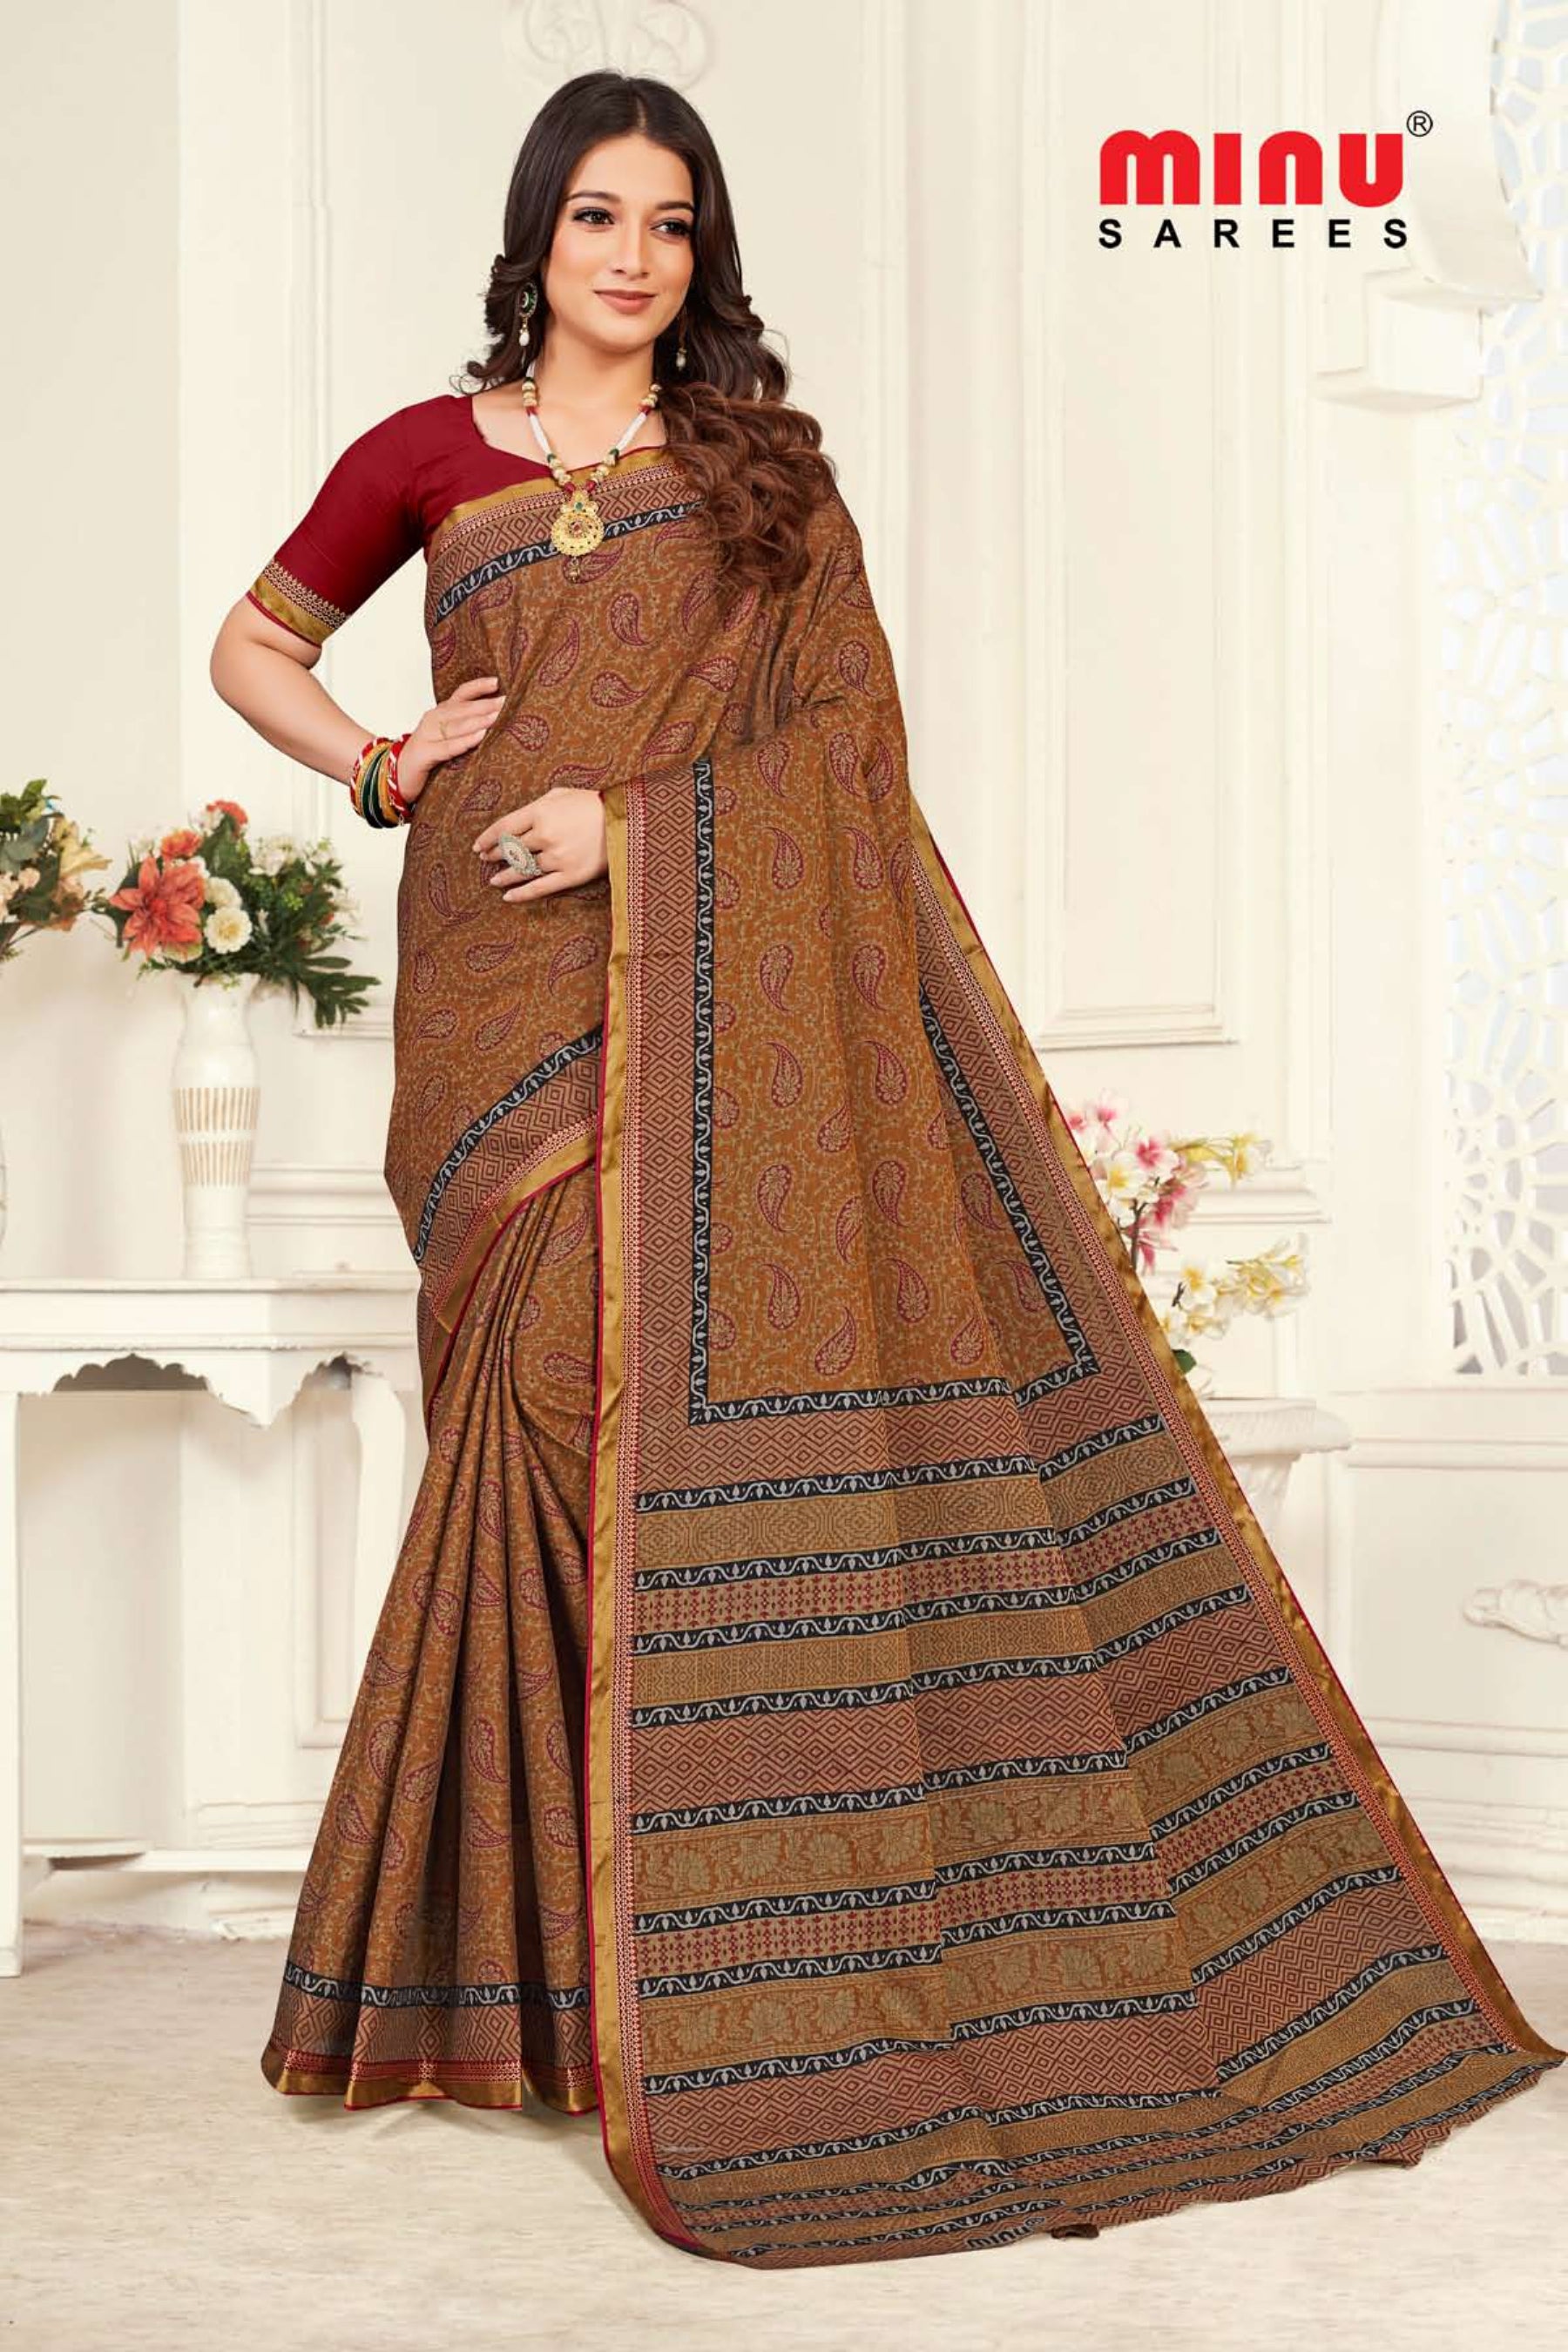 Online image of designer printed saree to resell